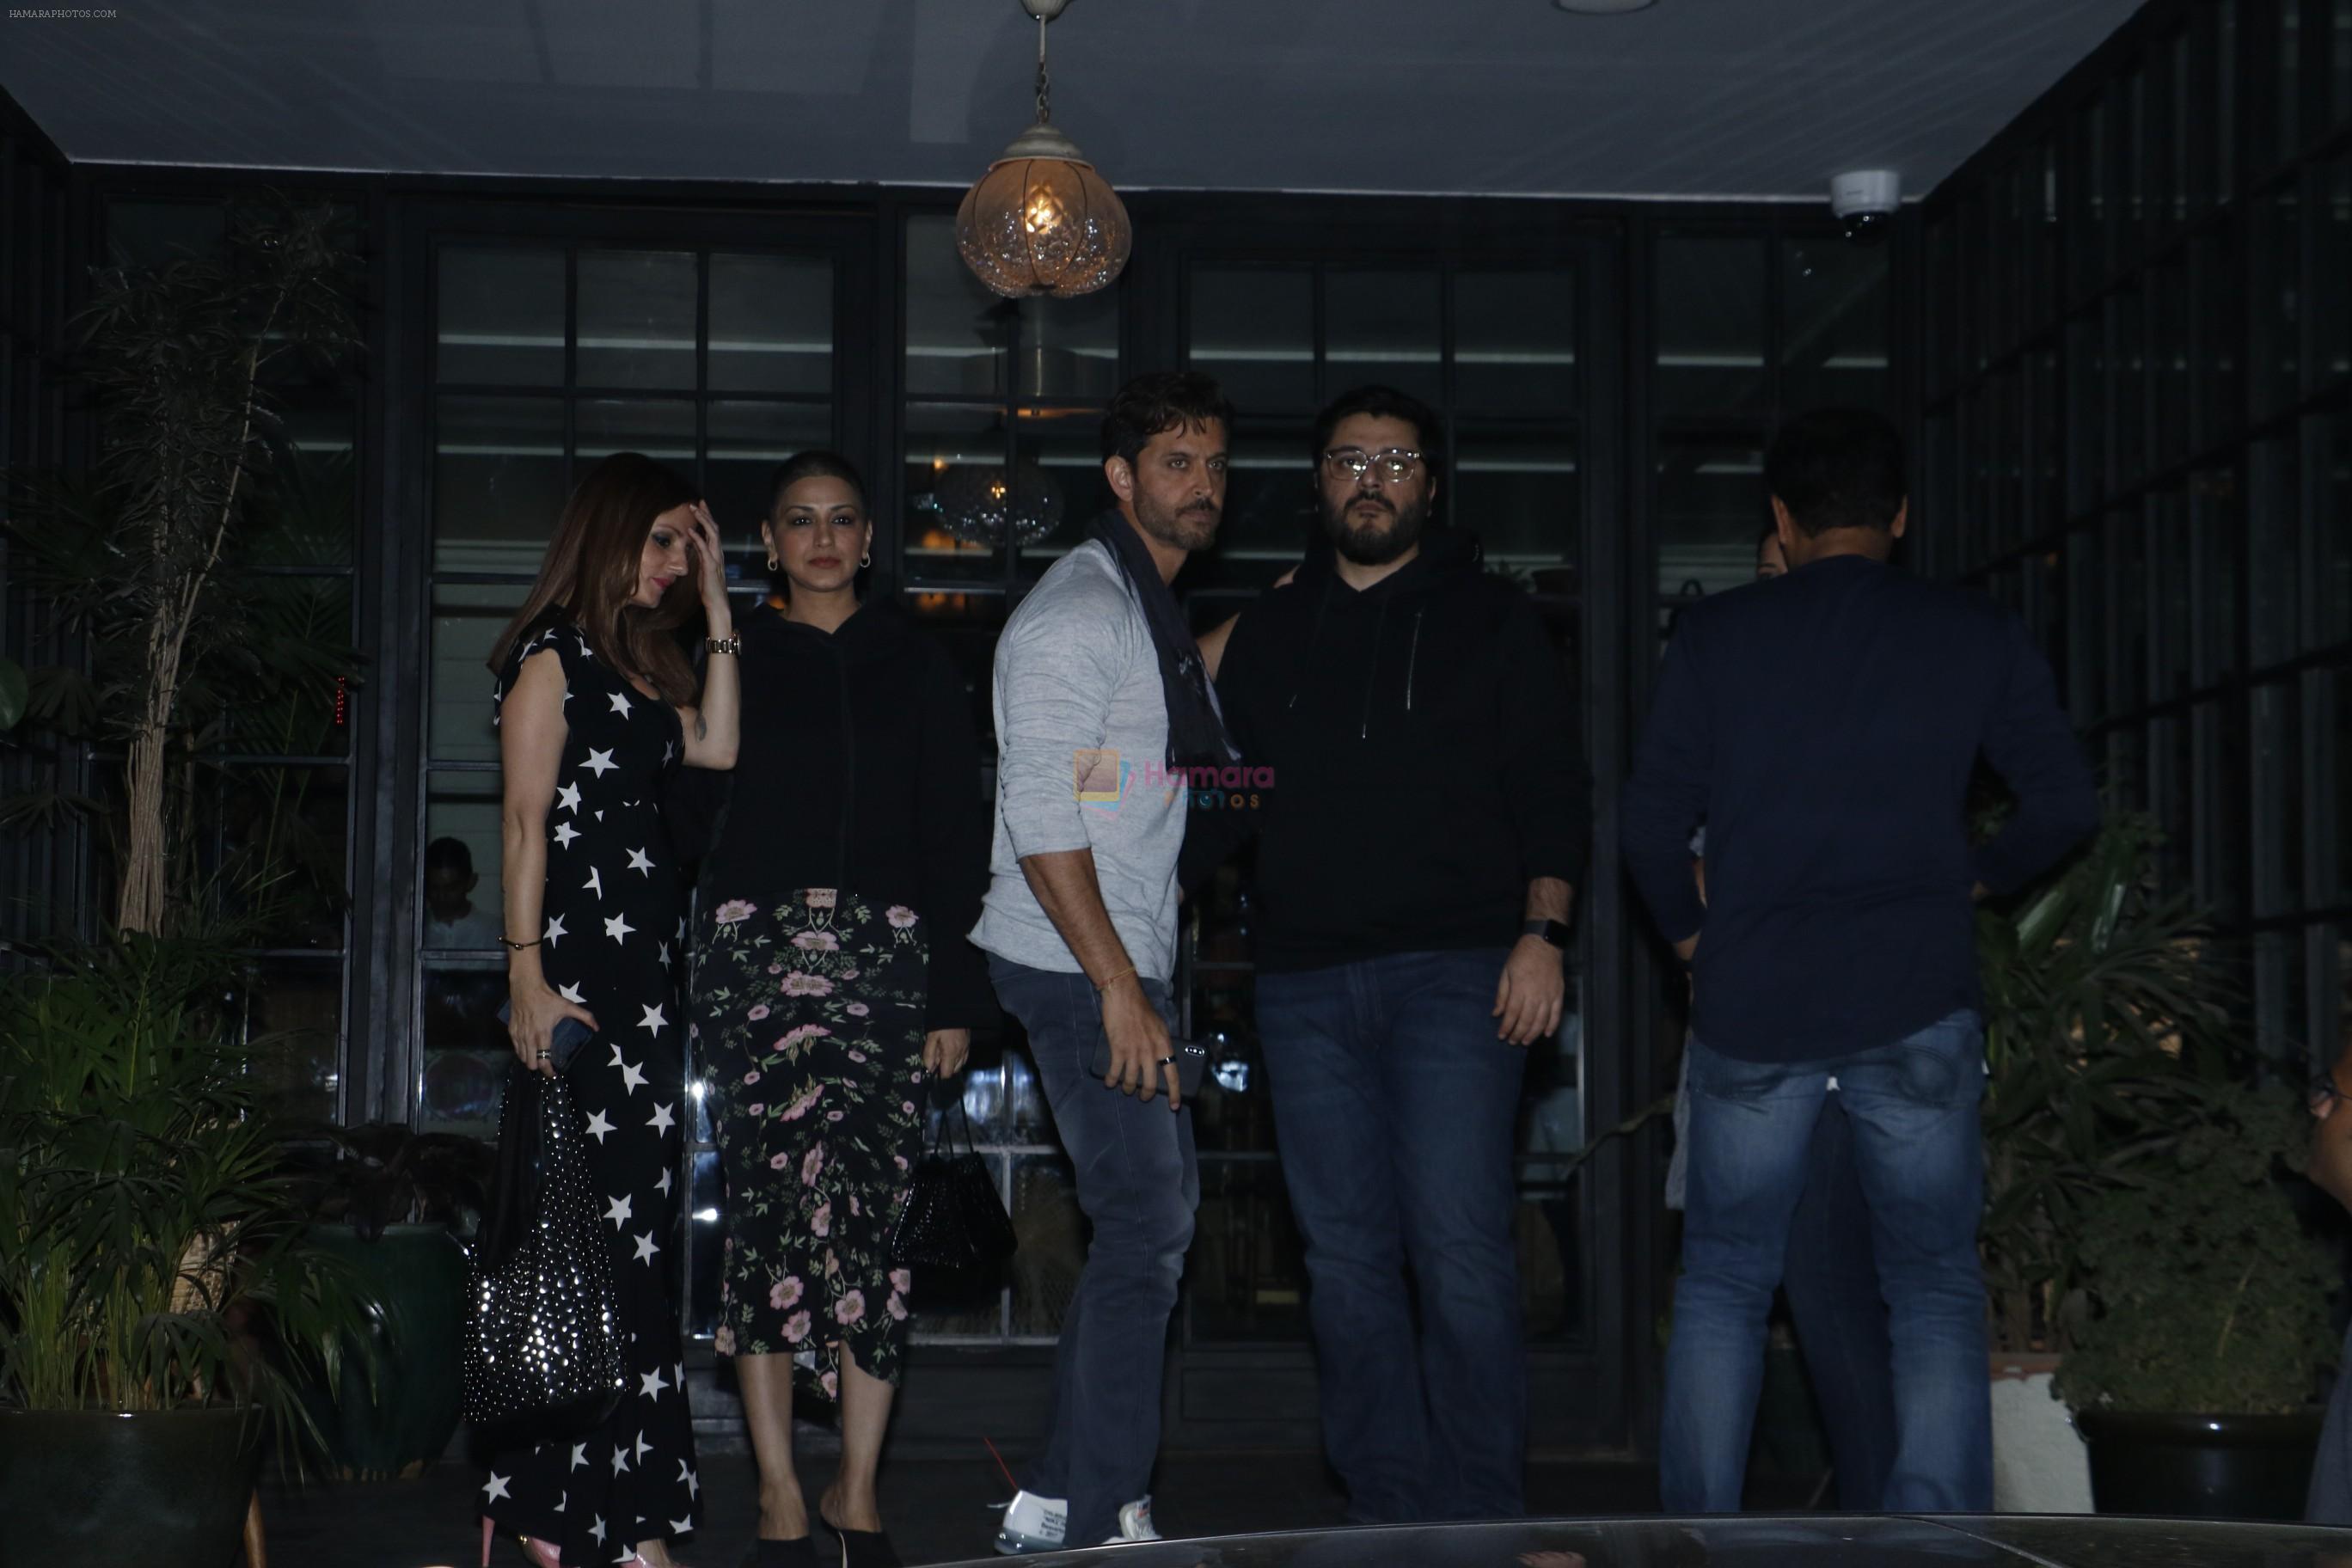 Hrithik Roshan, Sussanne, Sonali Bendre & Goldie Behl at Soho house in juhu on 10th Jan 2019